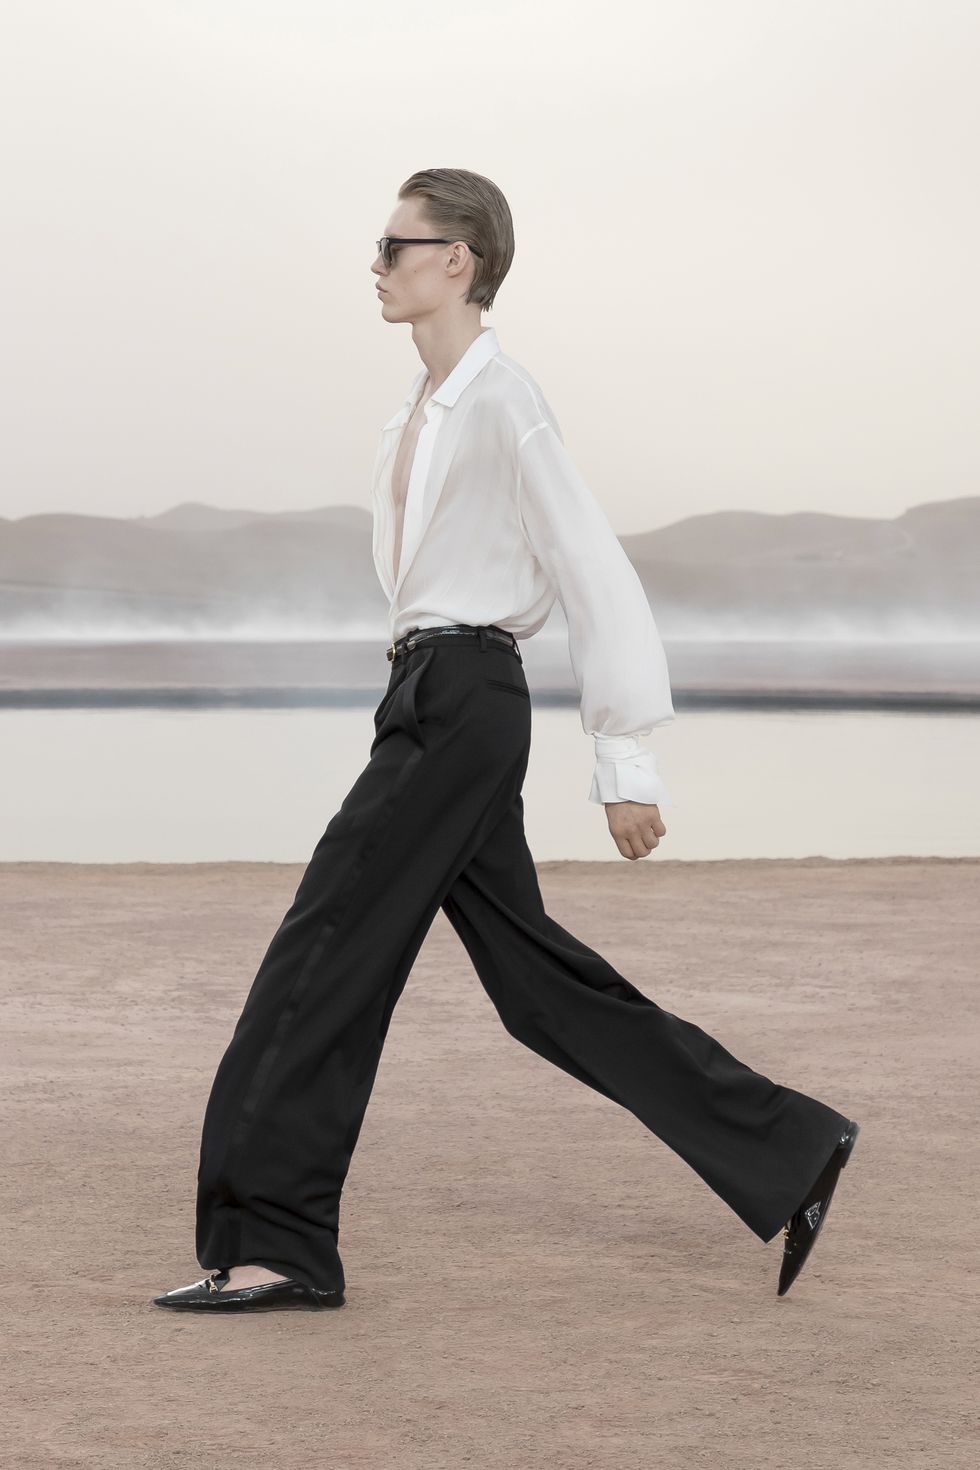 How To Style Zara High Waisted Trousers - Digitaldaybook  High waisted pants  outfit, High waist outfits, High waisted trousers outfit